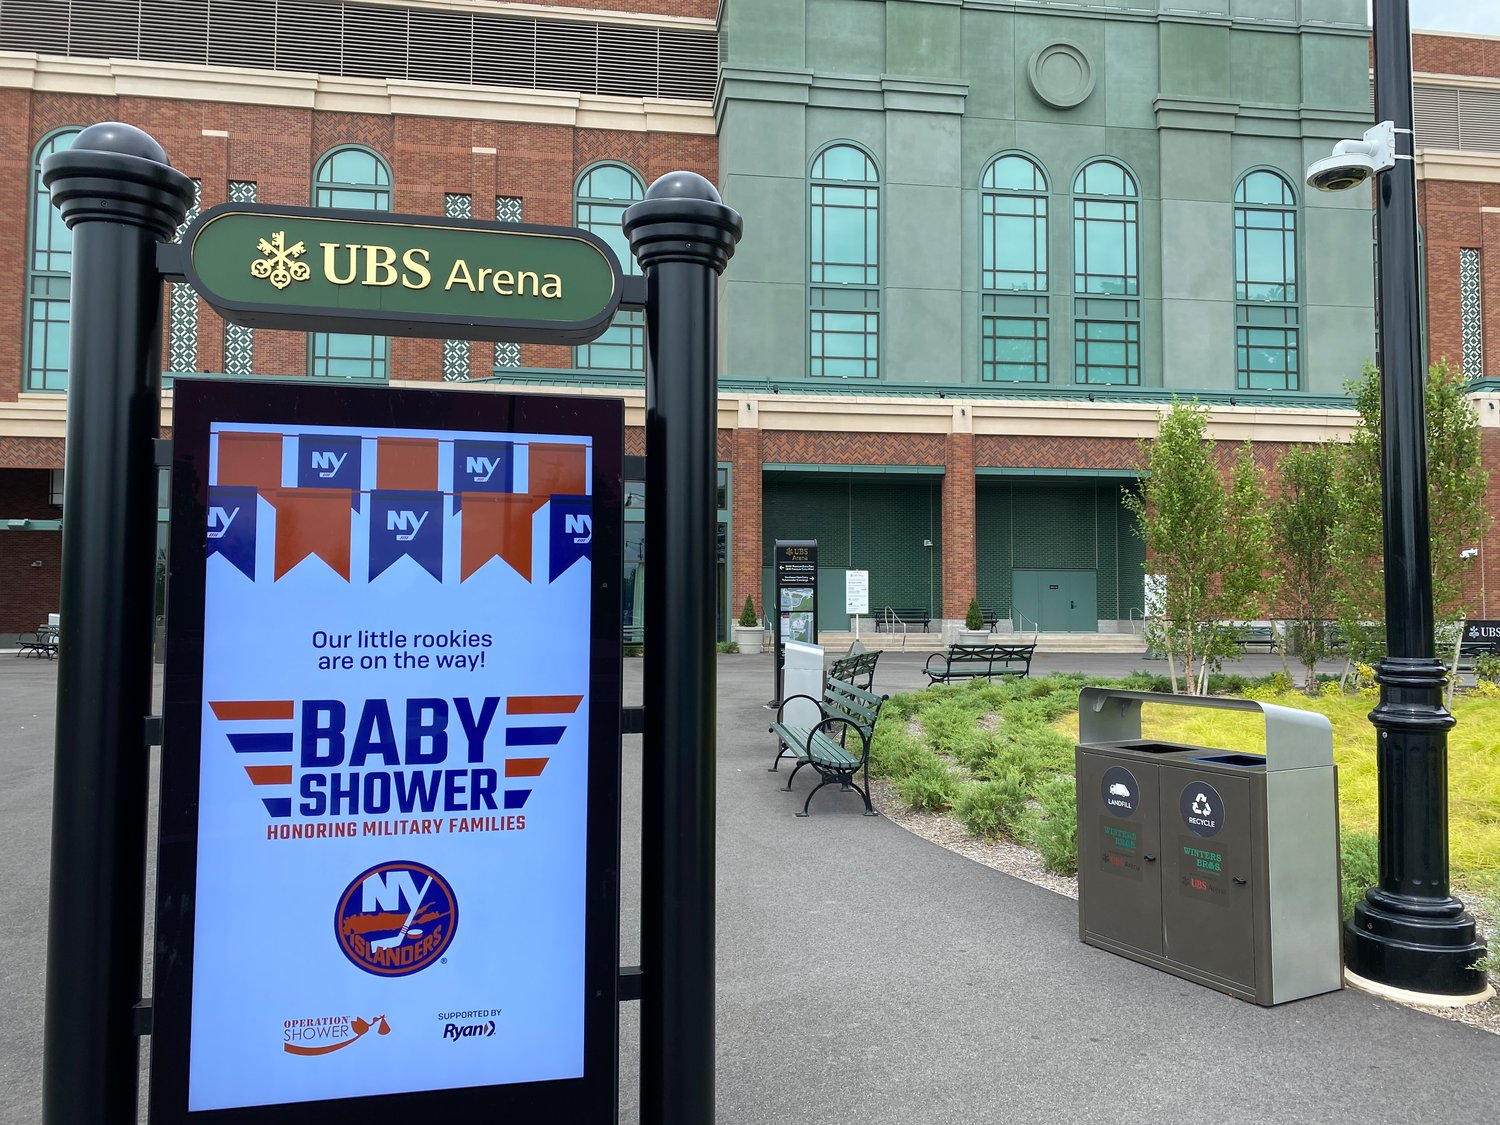 Many newborn children of military couples attended a baby shower at UBS Arena, sponsored by the New York Islanders and the nonprofit Operation Shower.